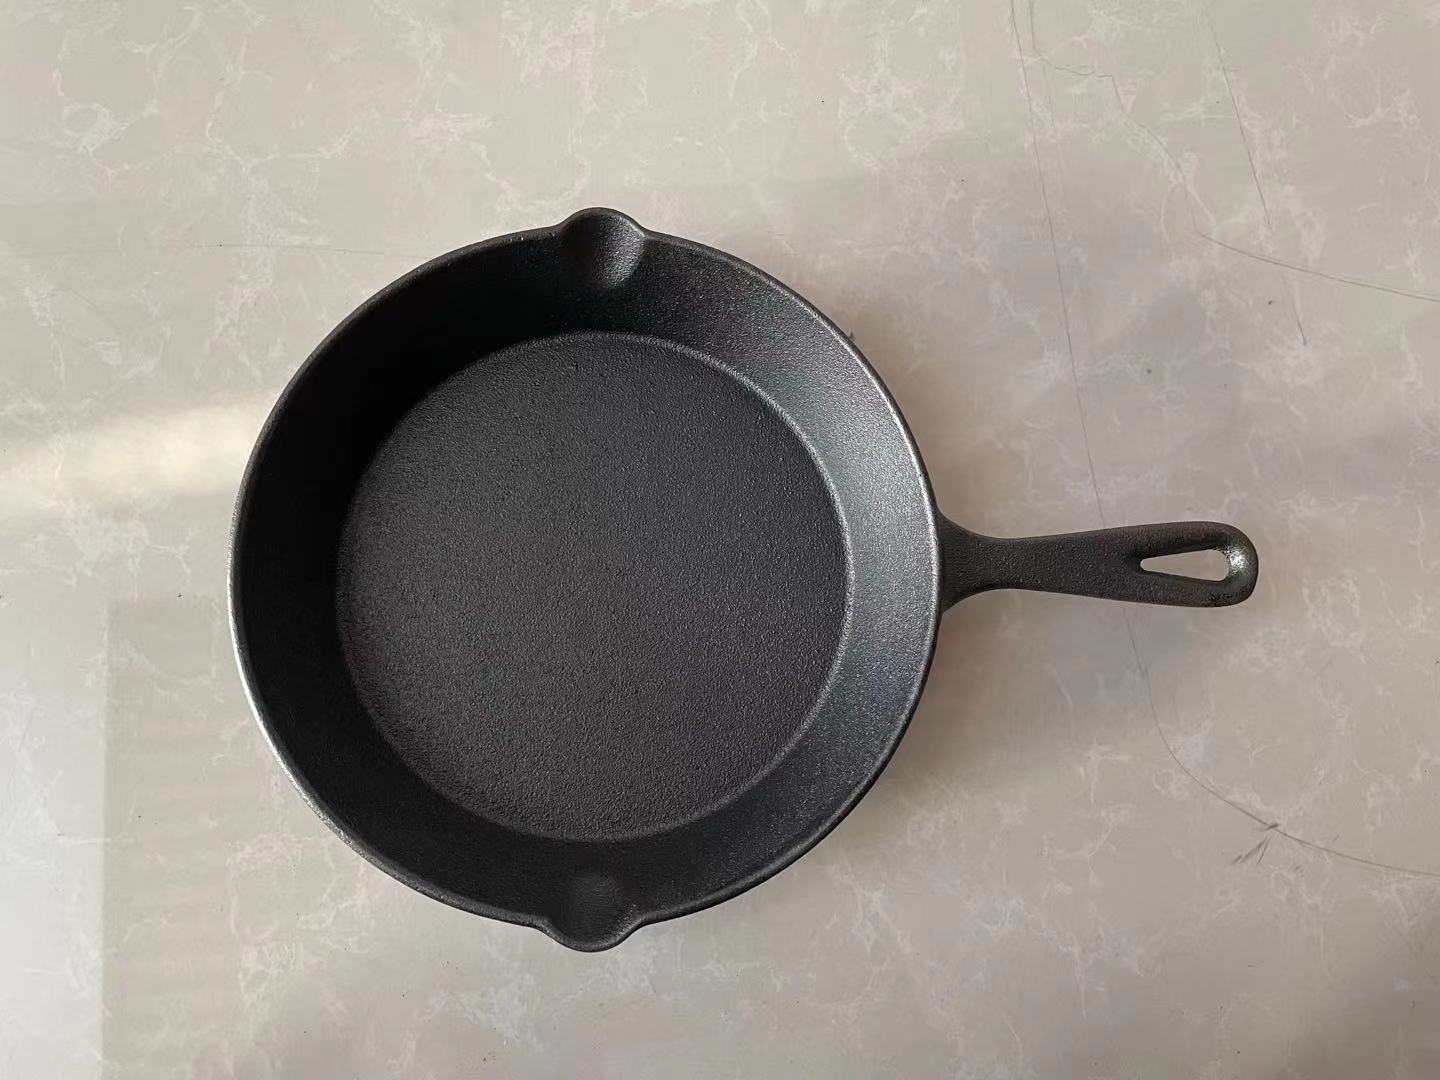 What are the benefits of cast iron frying pan?